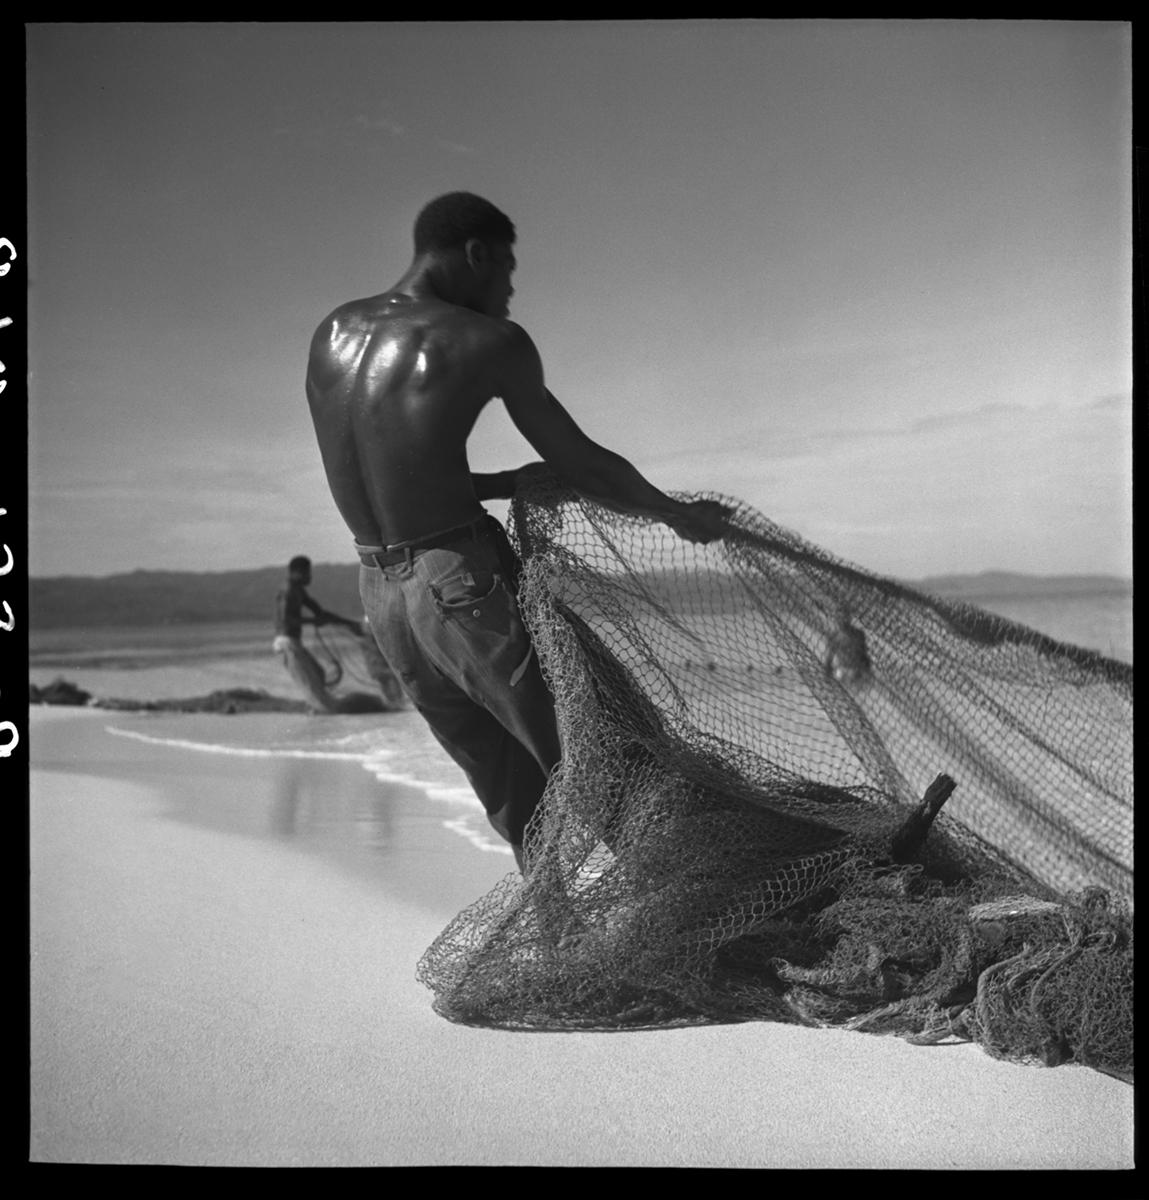 Montego Bay Fishermen 1940s Toni Frissell Limited Signature Stamped Edition

Fishermen at work on a beach in Montego Bay Jamaica circa 1940.

by Toni Frissell

30 x 30" inches / 76 x 761500 cm paper size 
Silver gelatine fibre print
unframed